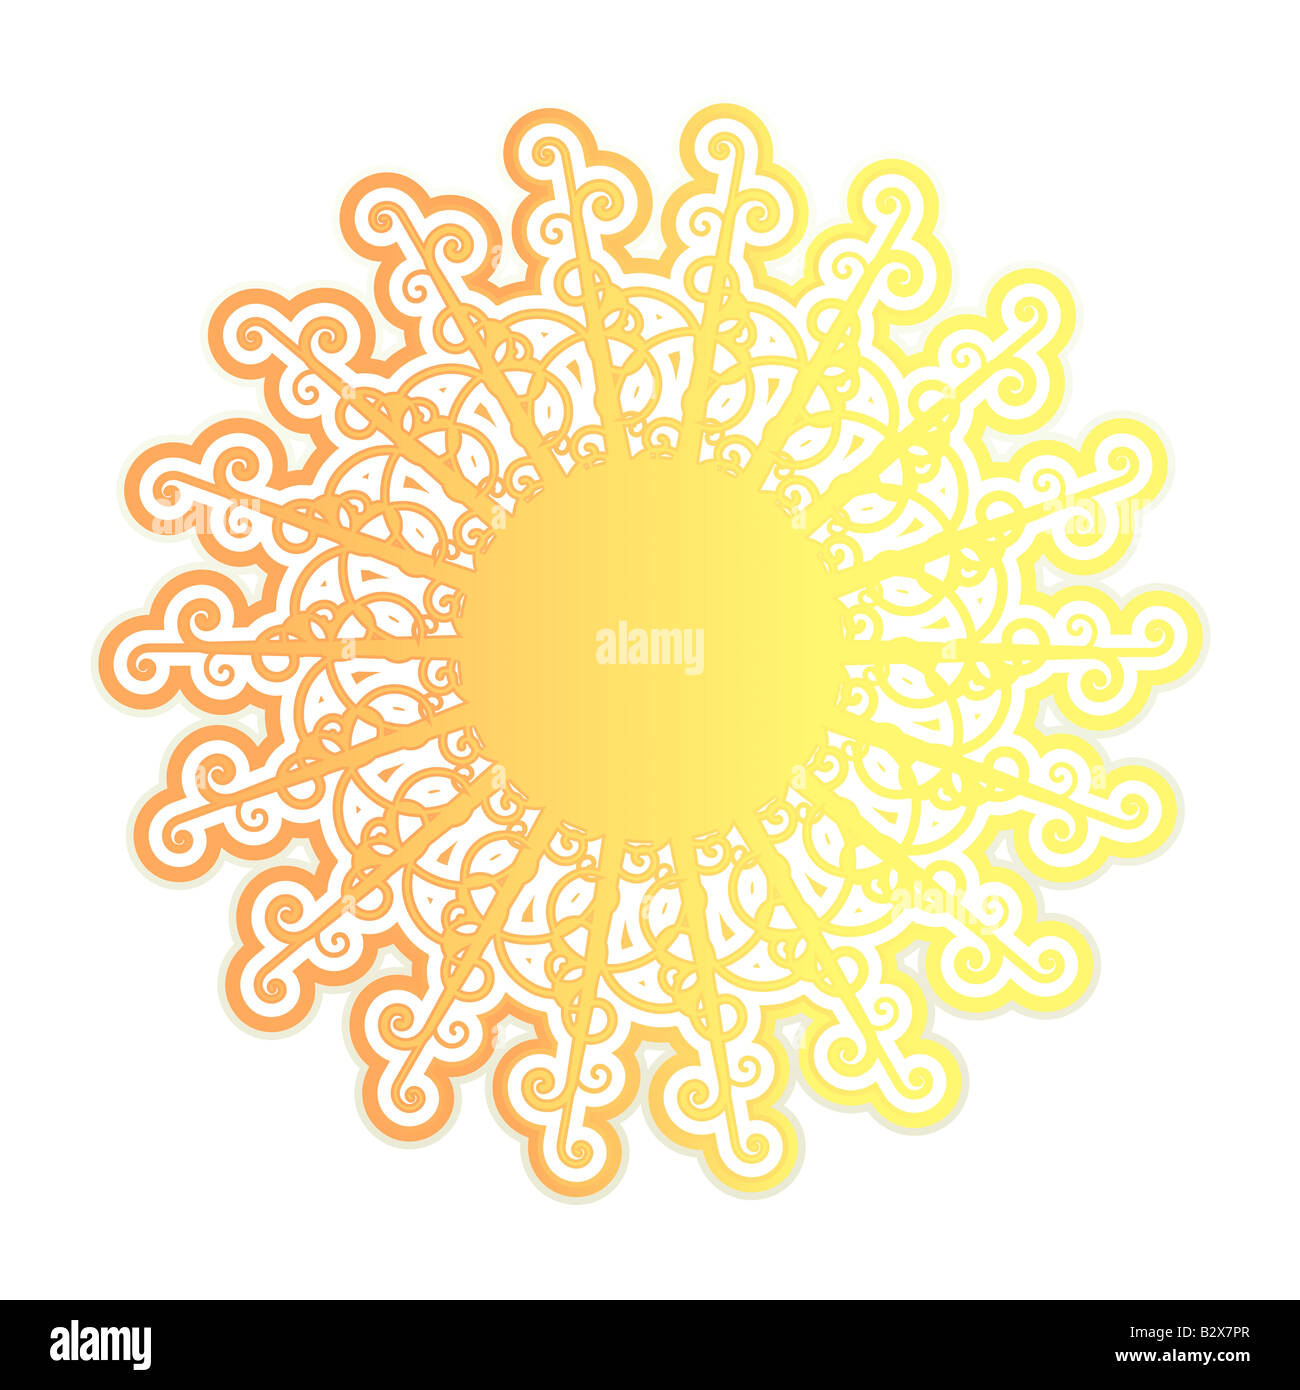 Vector illustration of a stylized retro funky sun with slick gradients Stock Photo